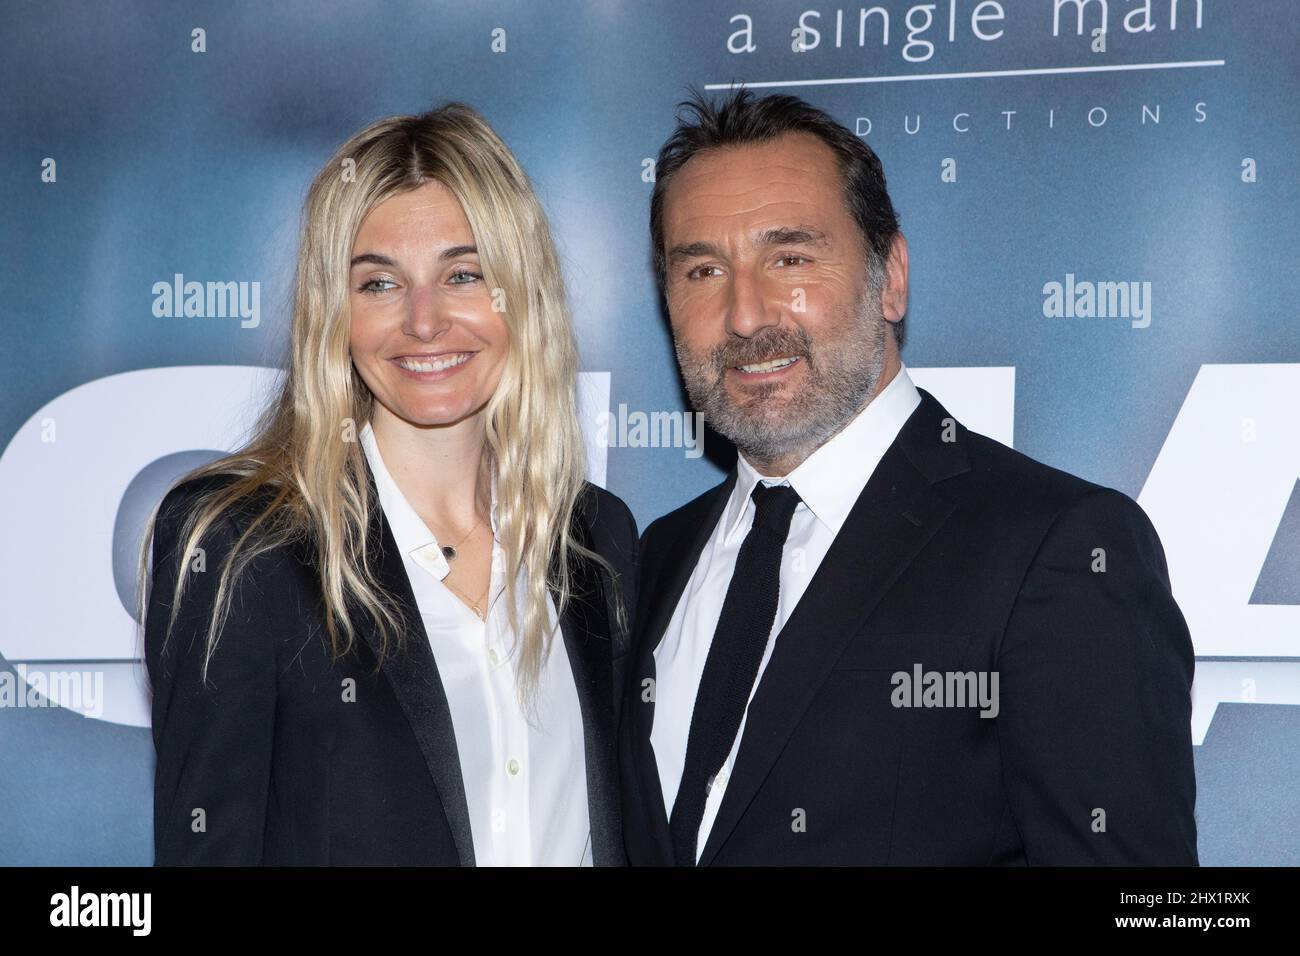 Paris, France, the 8th march 2022, the team of the film Goliath, Gilles Lellouche and his wife Alizée Guinochet, François Loock/Alamy Stock Photo